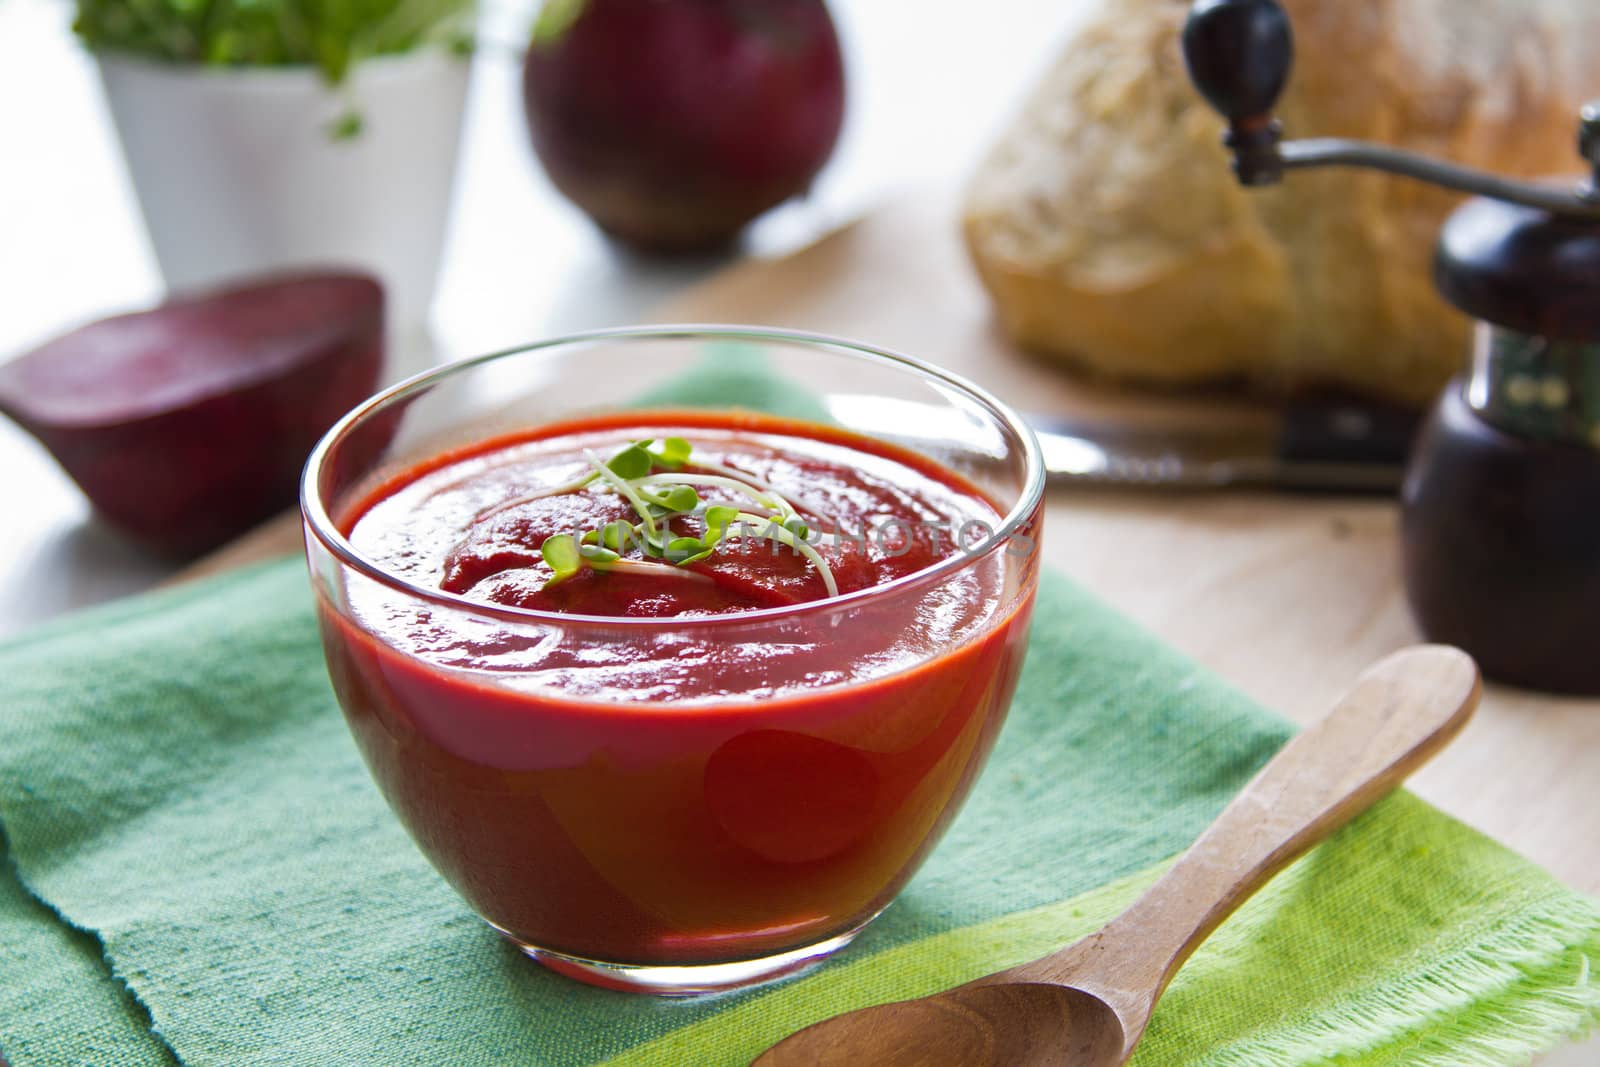 Beetroot with carrot and tomato soup